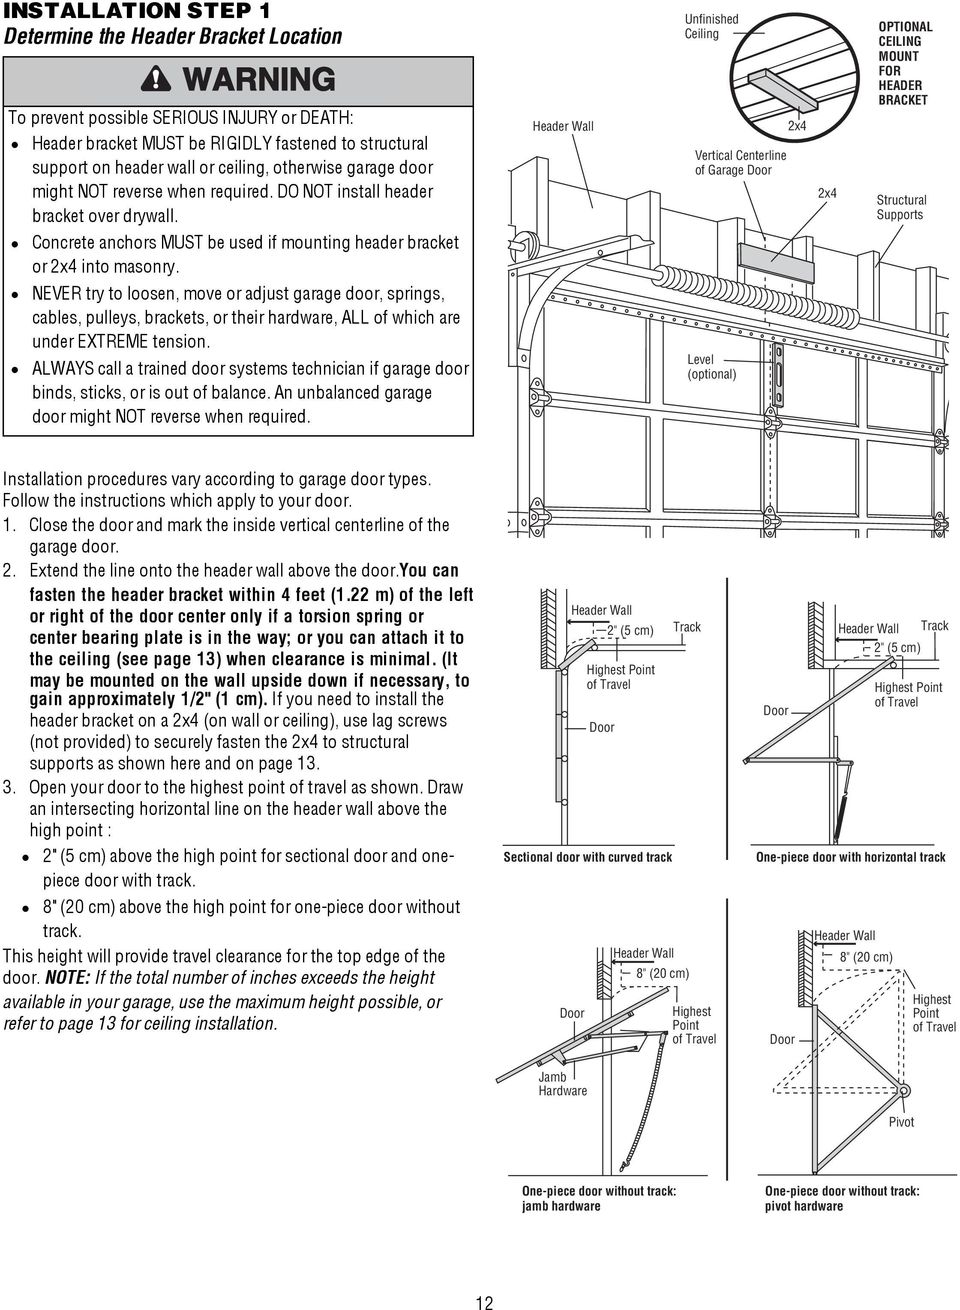 Header Wall Unfinished Ceiling Vertical Centerline of Garage Door 2x4 2x4 OPTIONAL CEILING MOUNT FOR HEADER BRACKET Structural Supports Concrete anchors MUST be used if mounting header bracket or 2x4